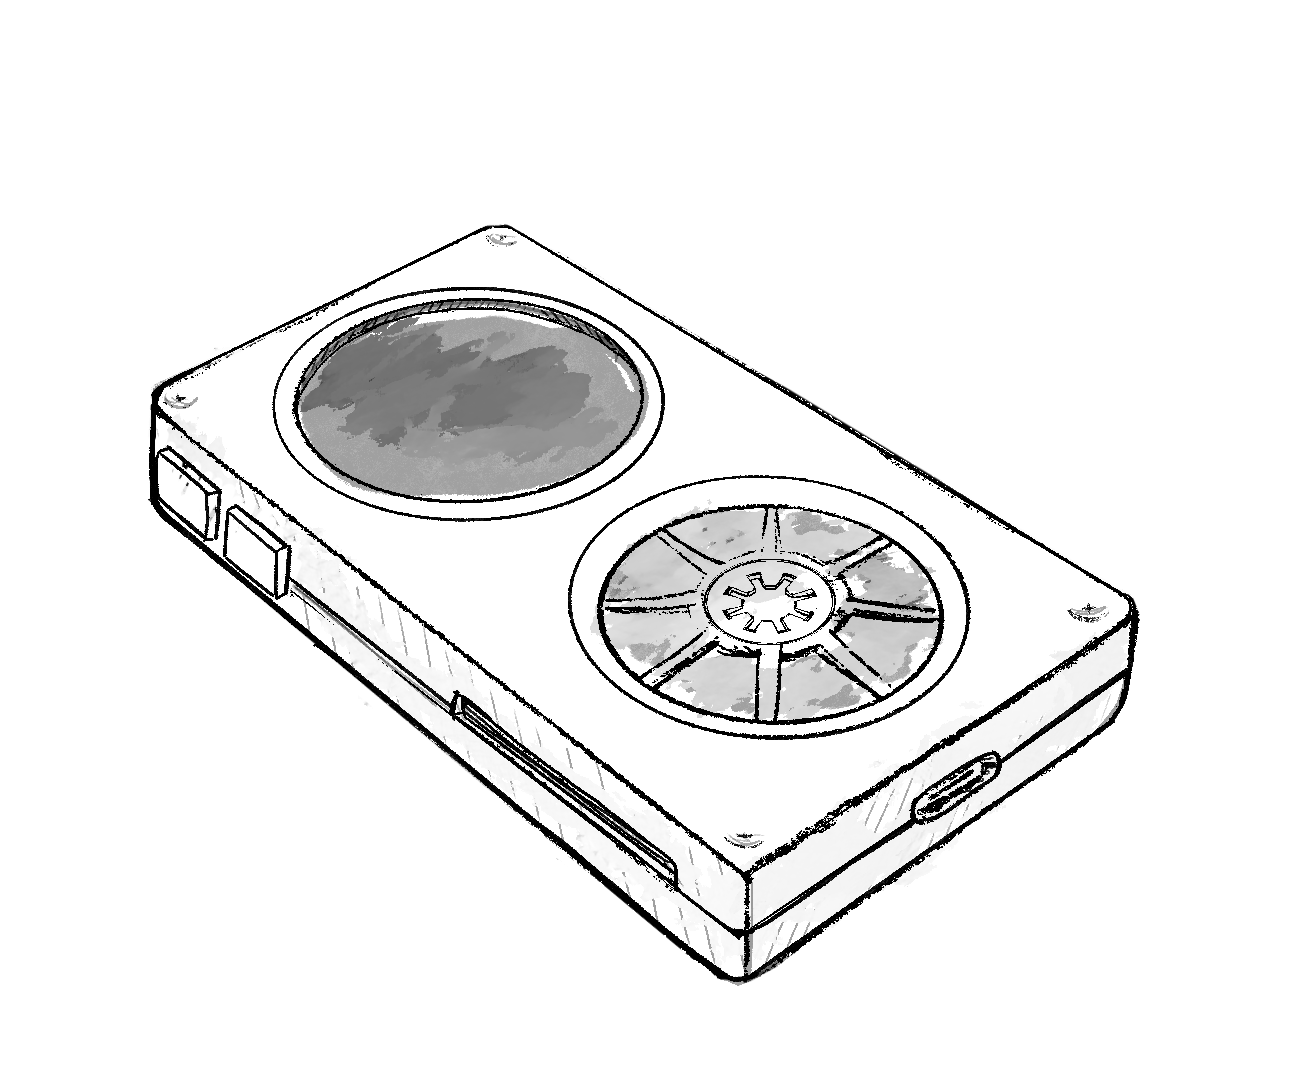 A concept sketch of a cassette tape like music player, with a circular screen and 3d printed reel